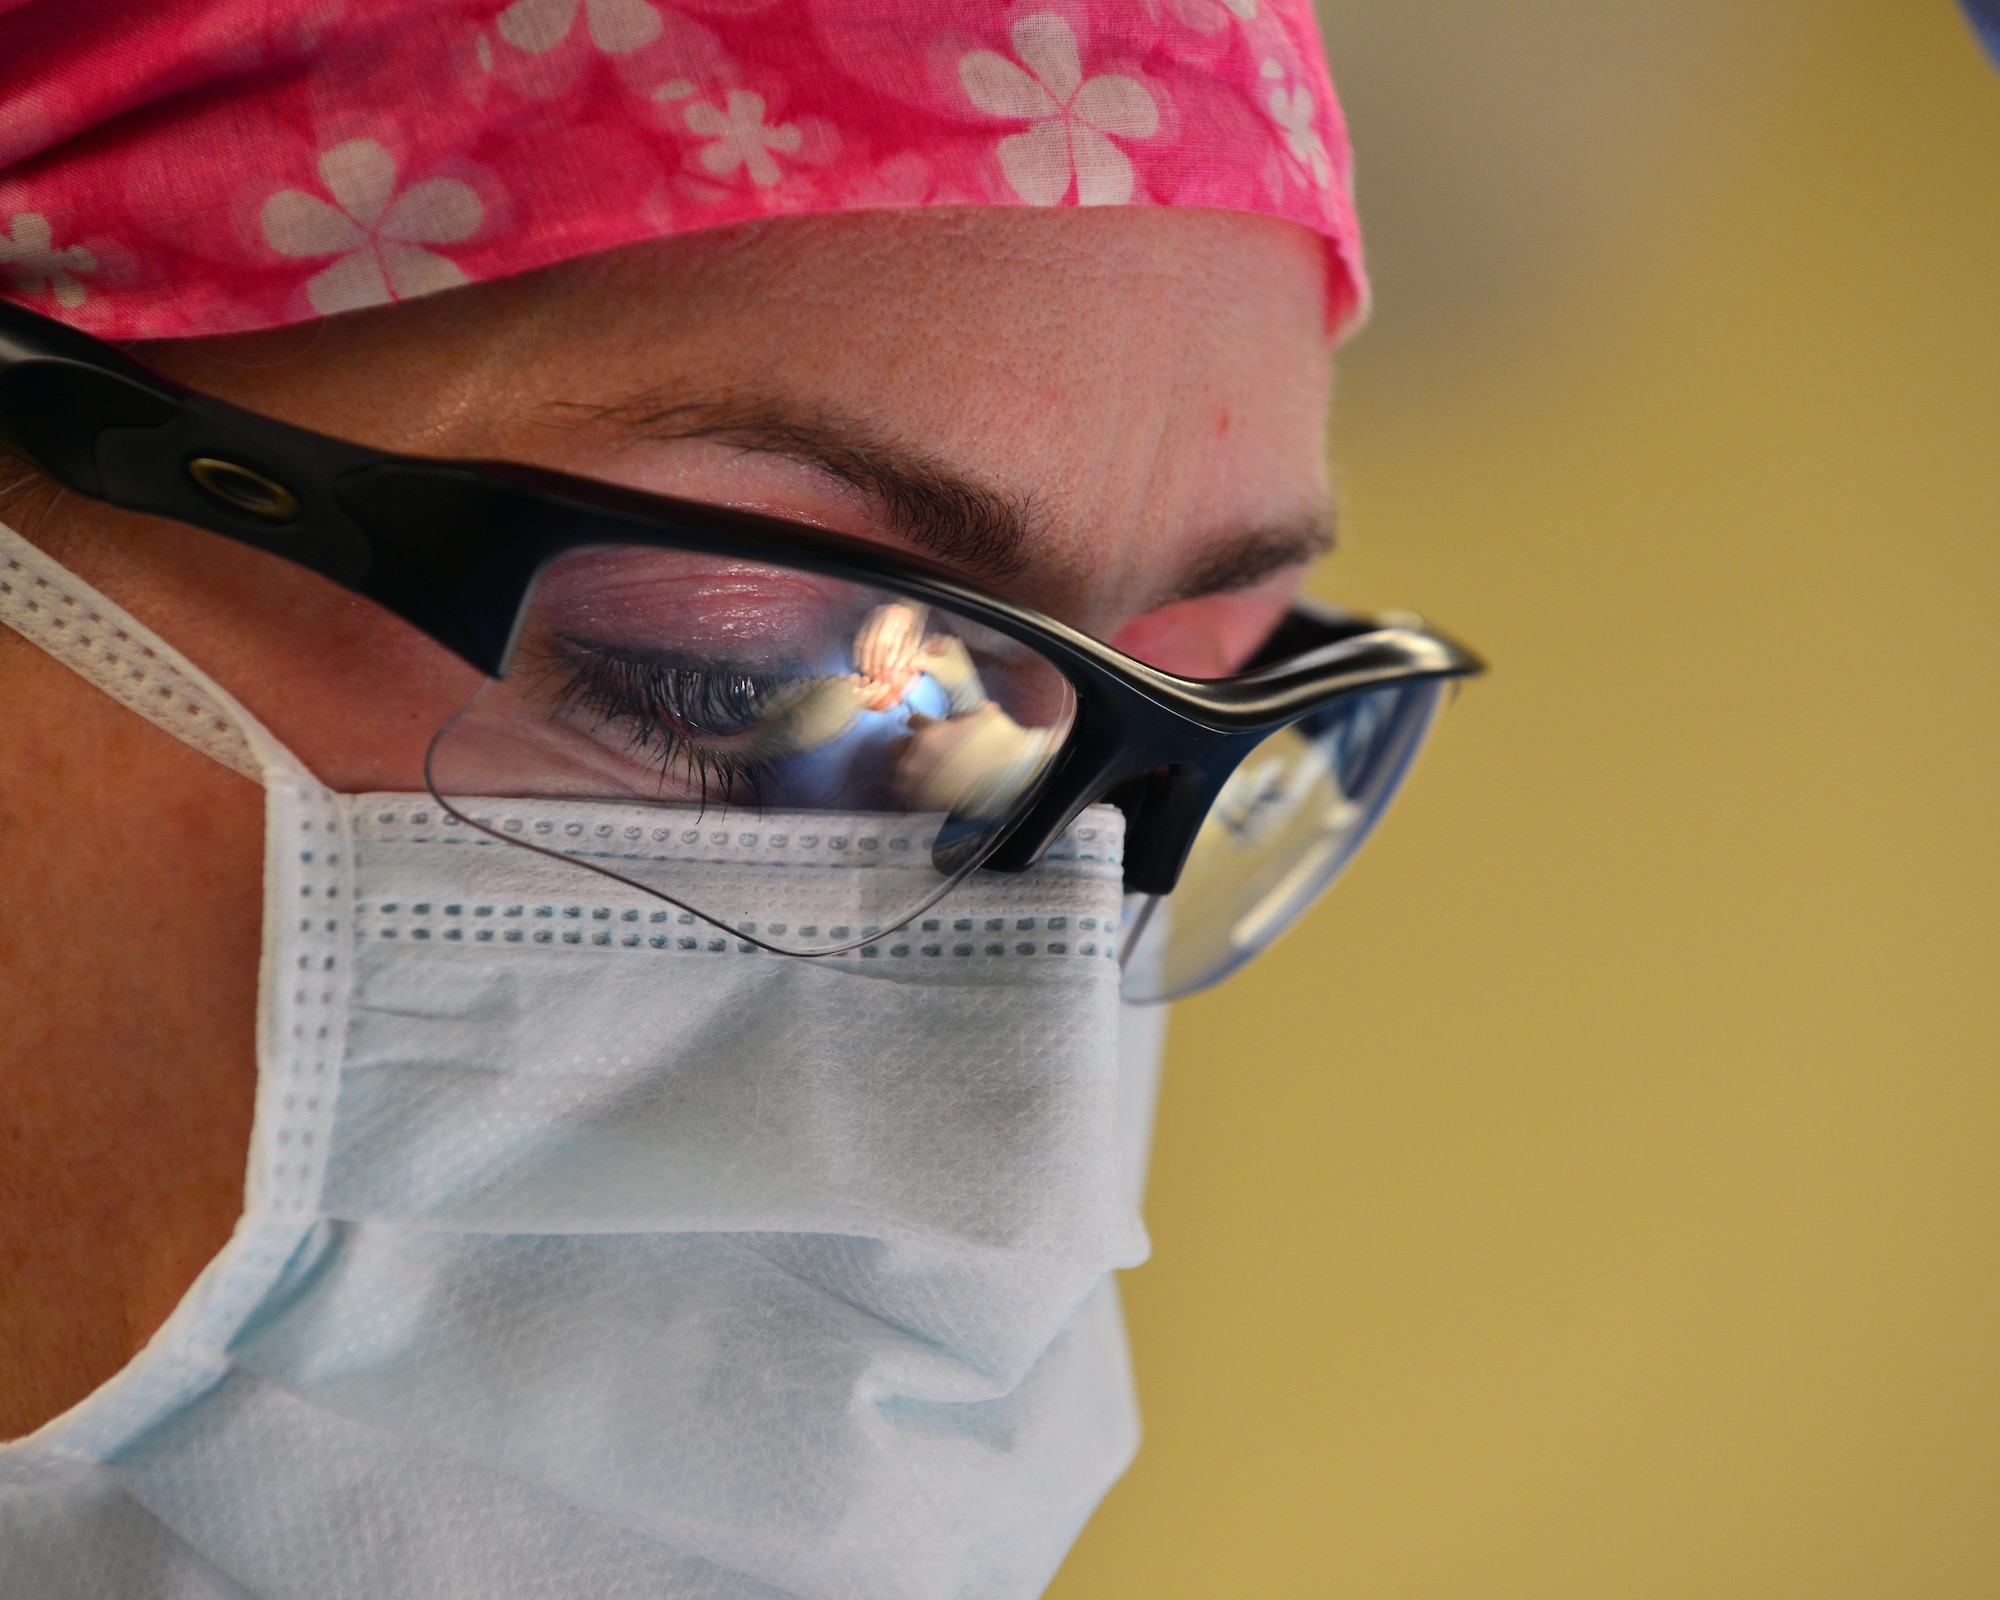 Maj. Alicia Capps assists with a minor surgery March 4, 2015, at Aviano Air Base, Italy. The surgical team performs a variety of different routine surgeries, such as cesarean-sections, vasectomies, gall bladder removal, benign mass removal, orthopedics and biopsies for cancer. Capps is a 31st Surgical Operations Squadron physician’s assistant (U.S. Air Force photo/Airman 1st Class Ryan Conroy)